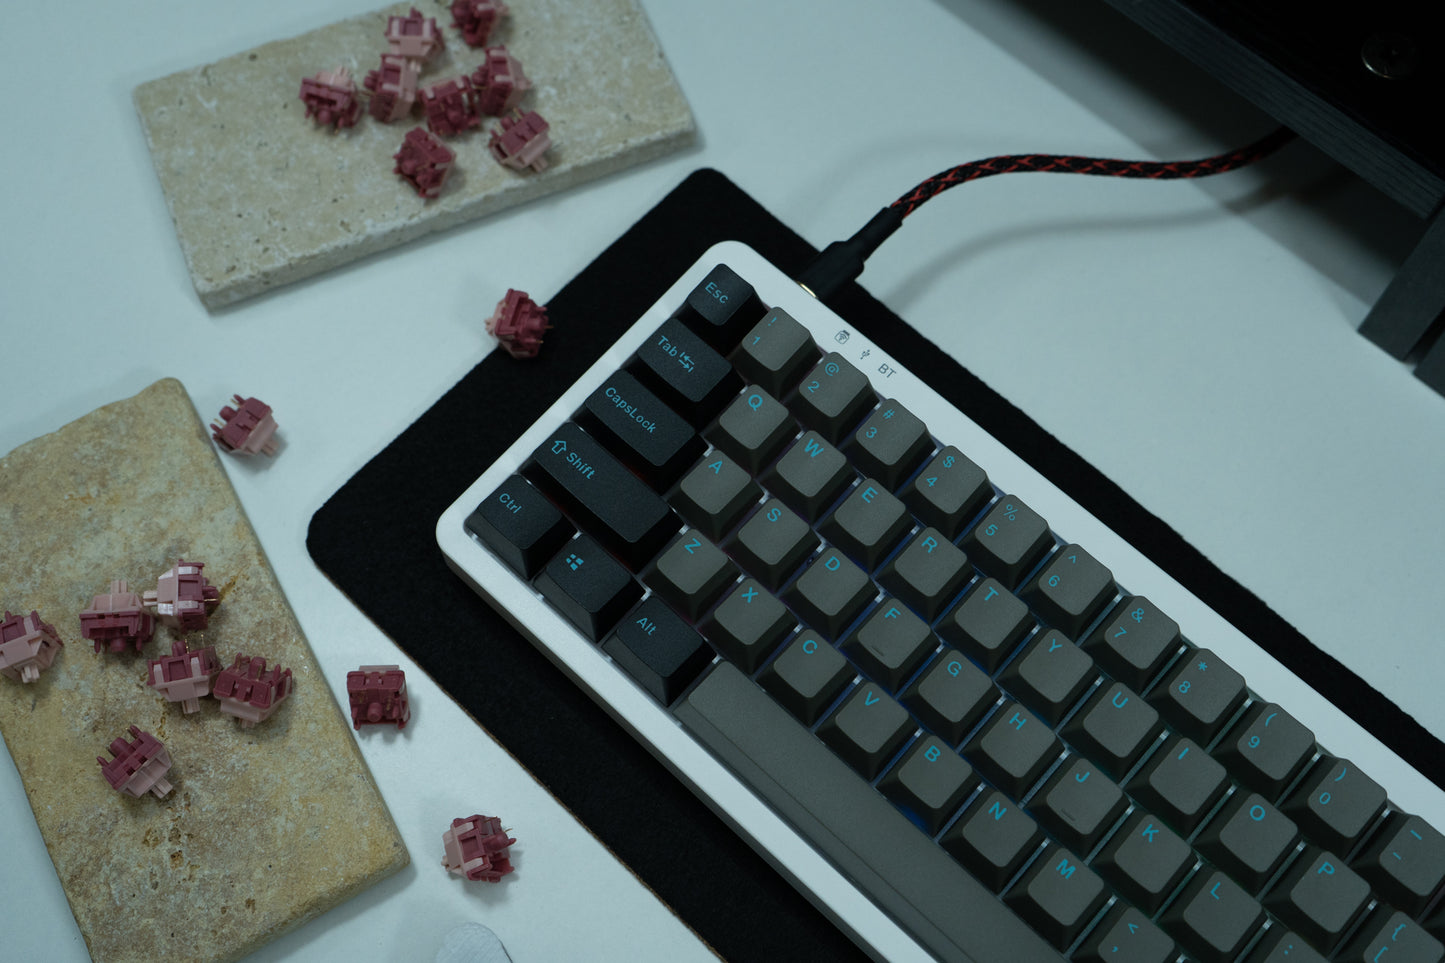 KF068 WITH PBT GRAPHITE KEYCAPS / WIRELESS ASSEMBLED 65% HOT-SWAP MECHANICAL KEYBOARD